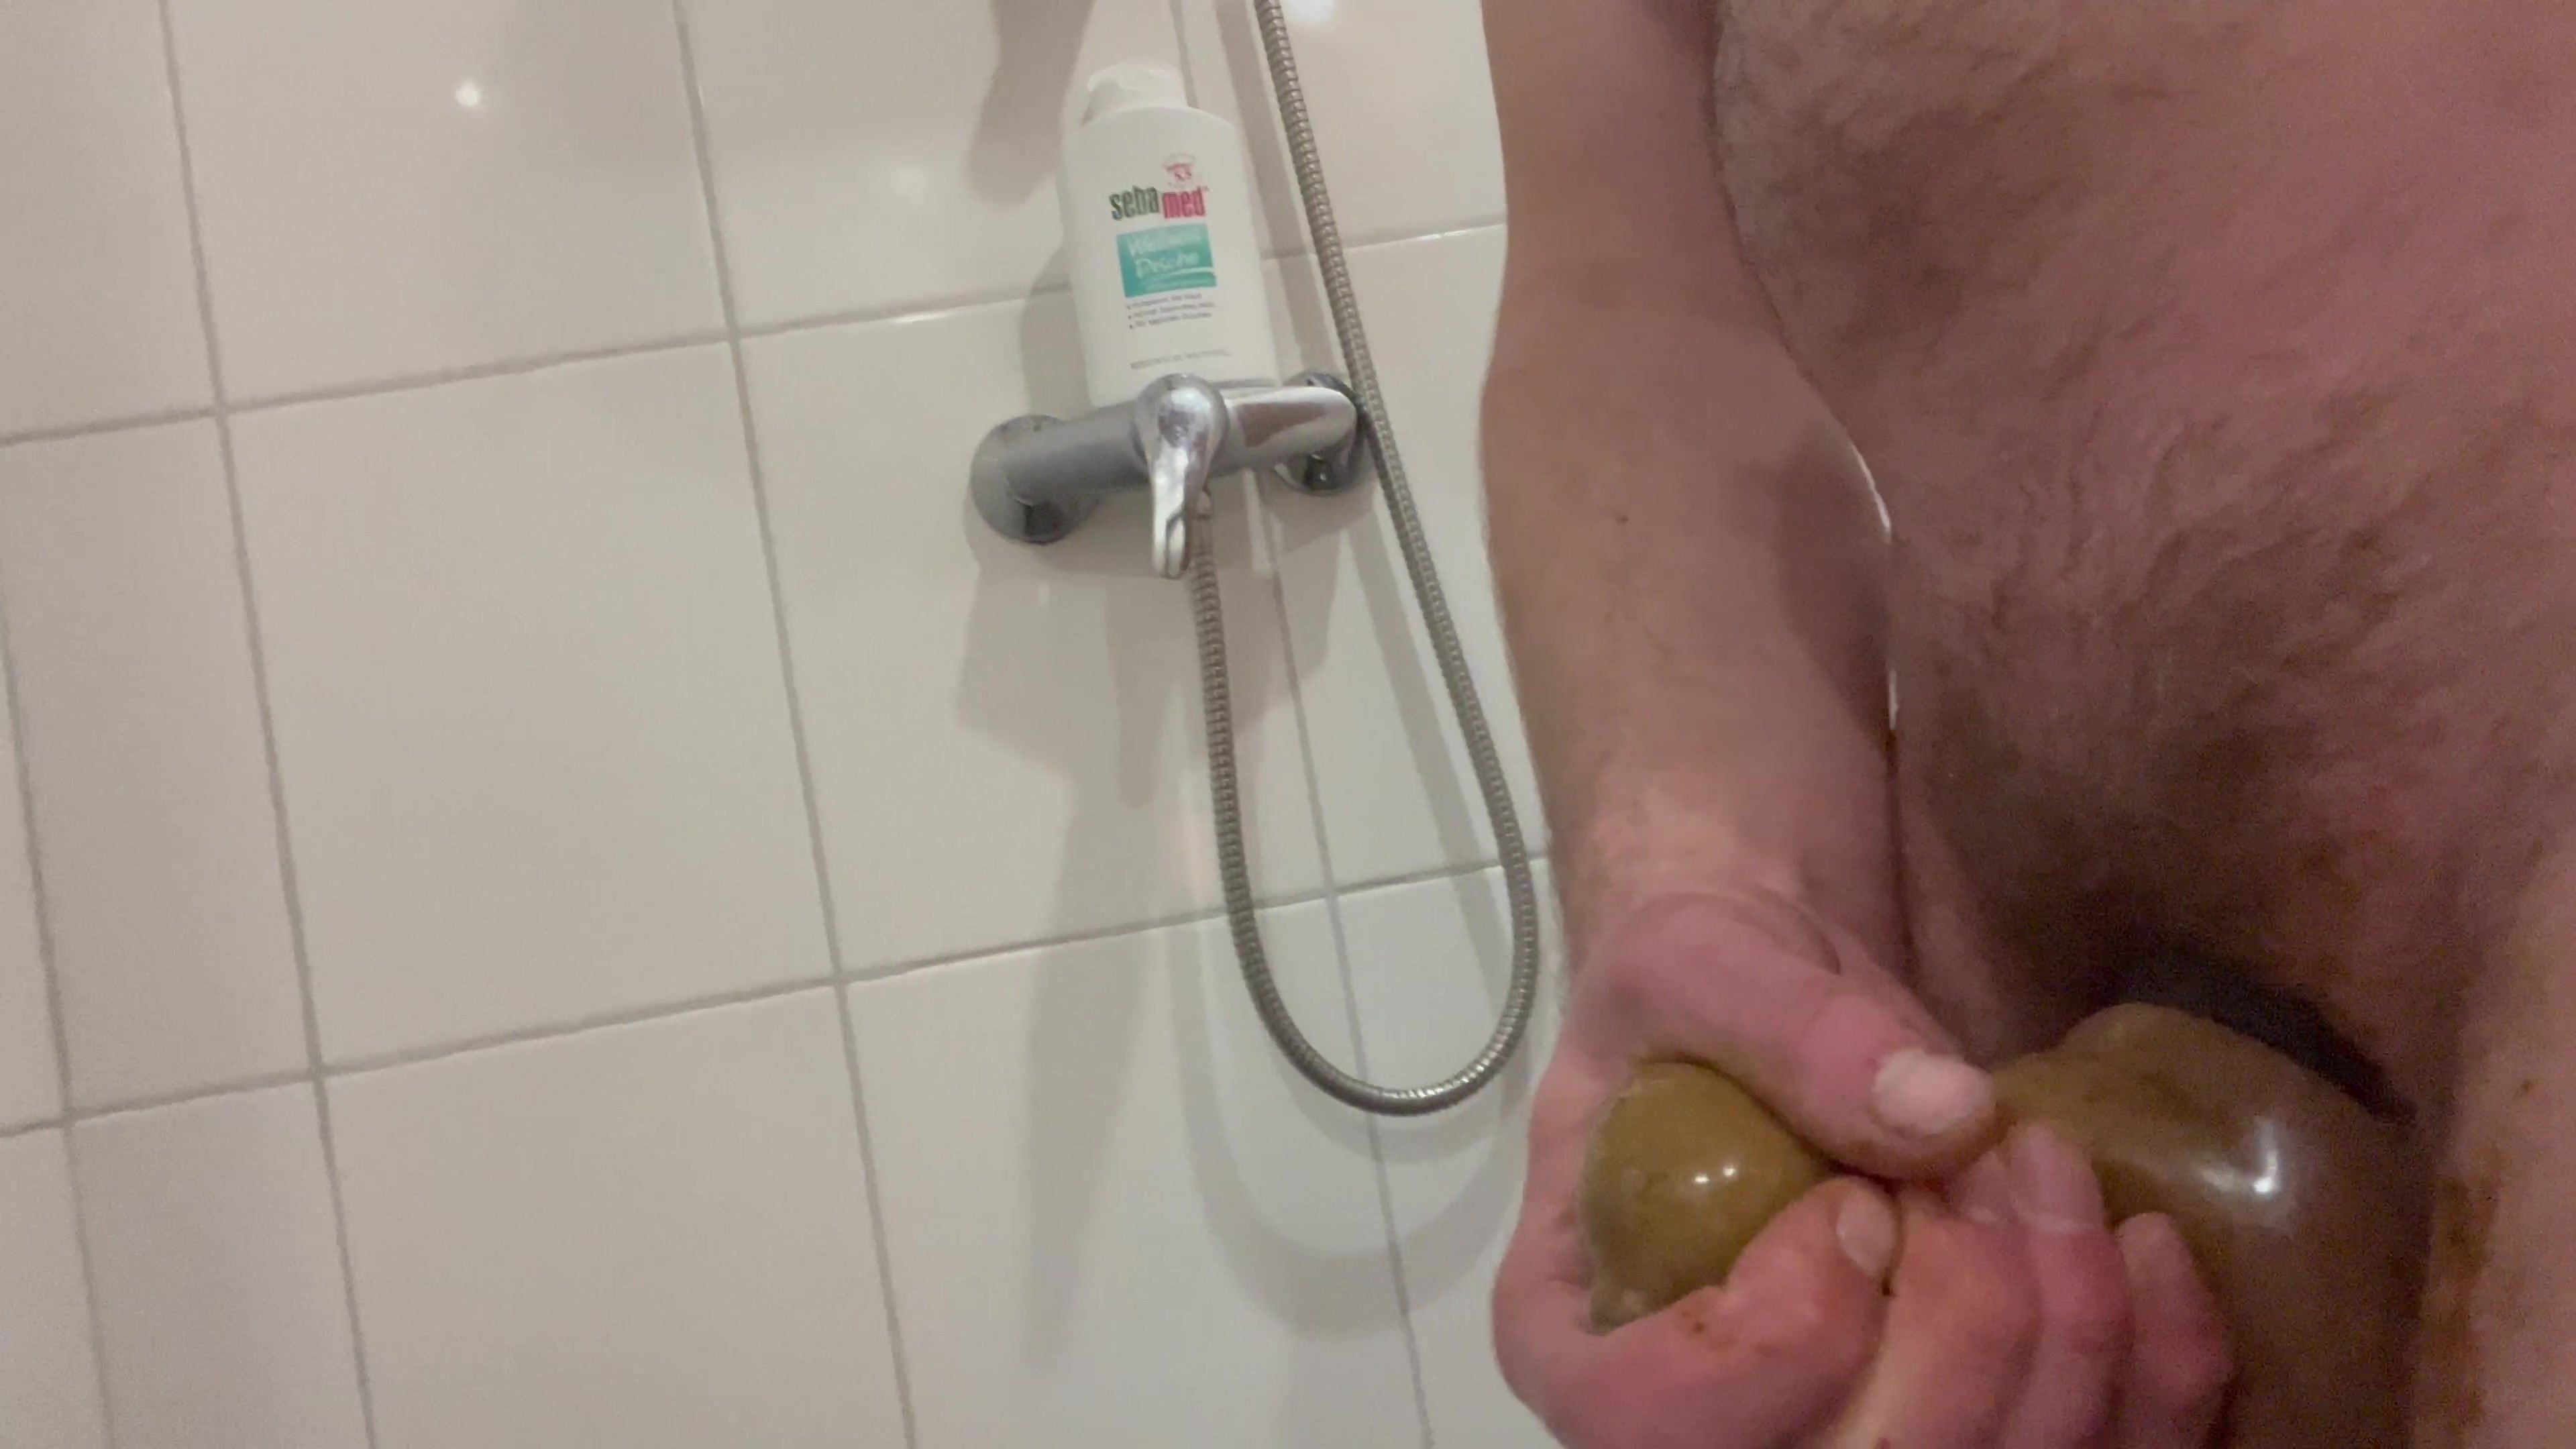 Jerking with shitty condom